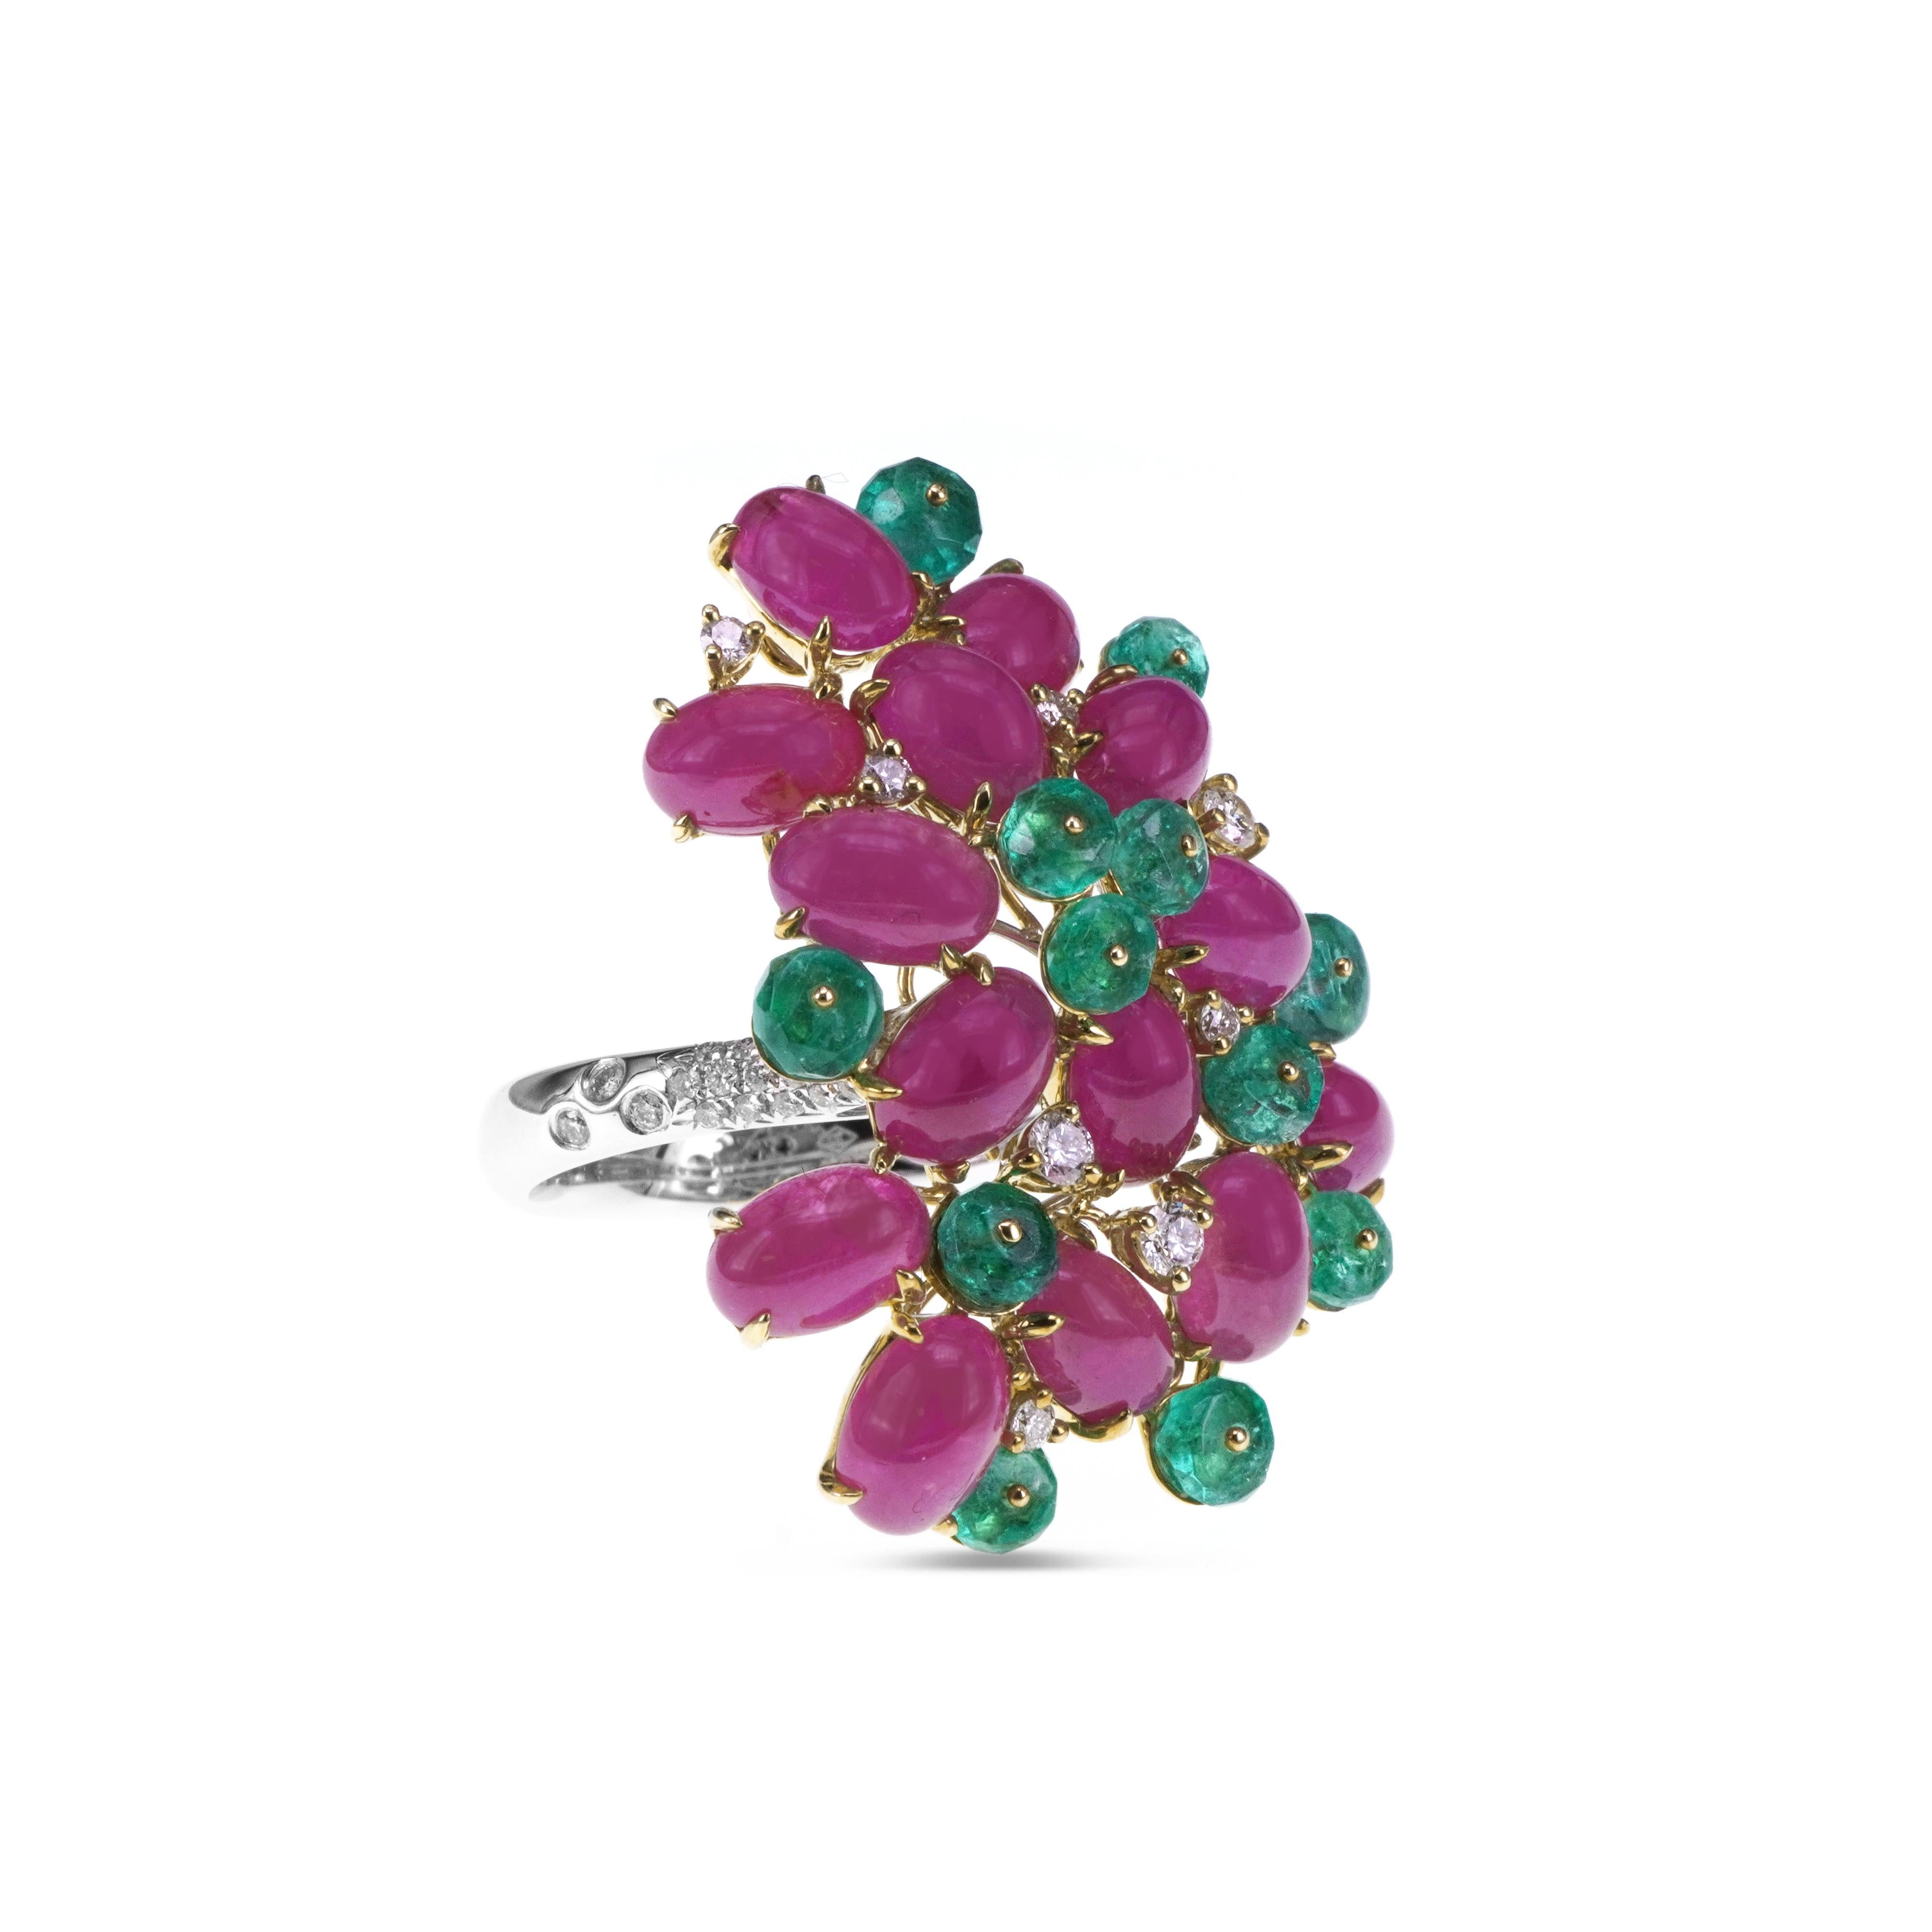 Contemporary 2.26 Carat Emerald 10.51 Carat Ruby Diamond Colorful Ring For Sale